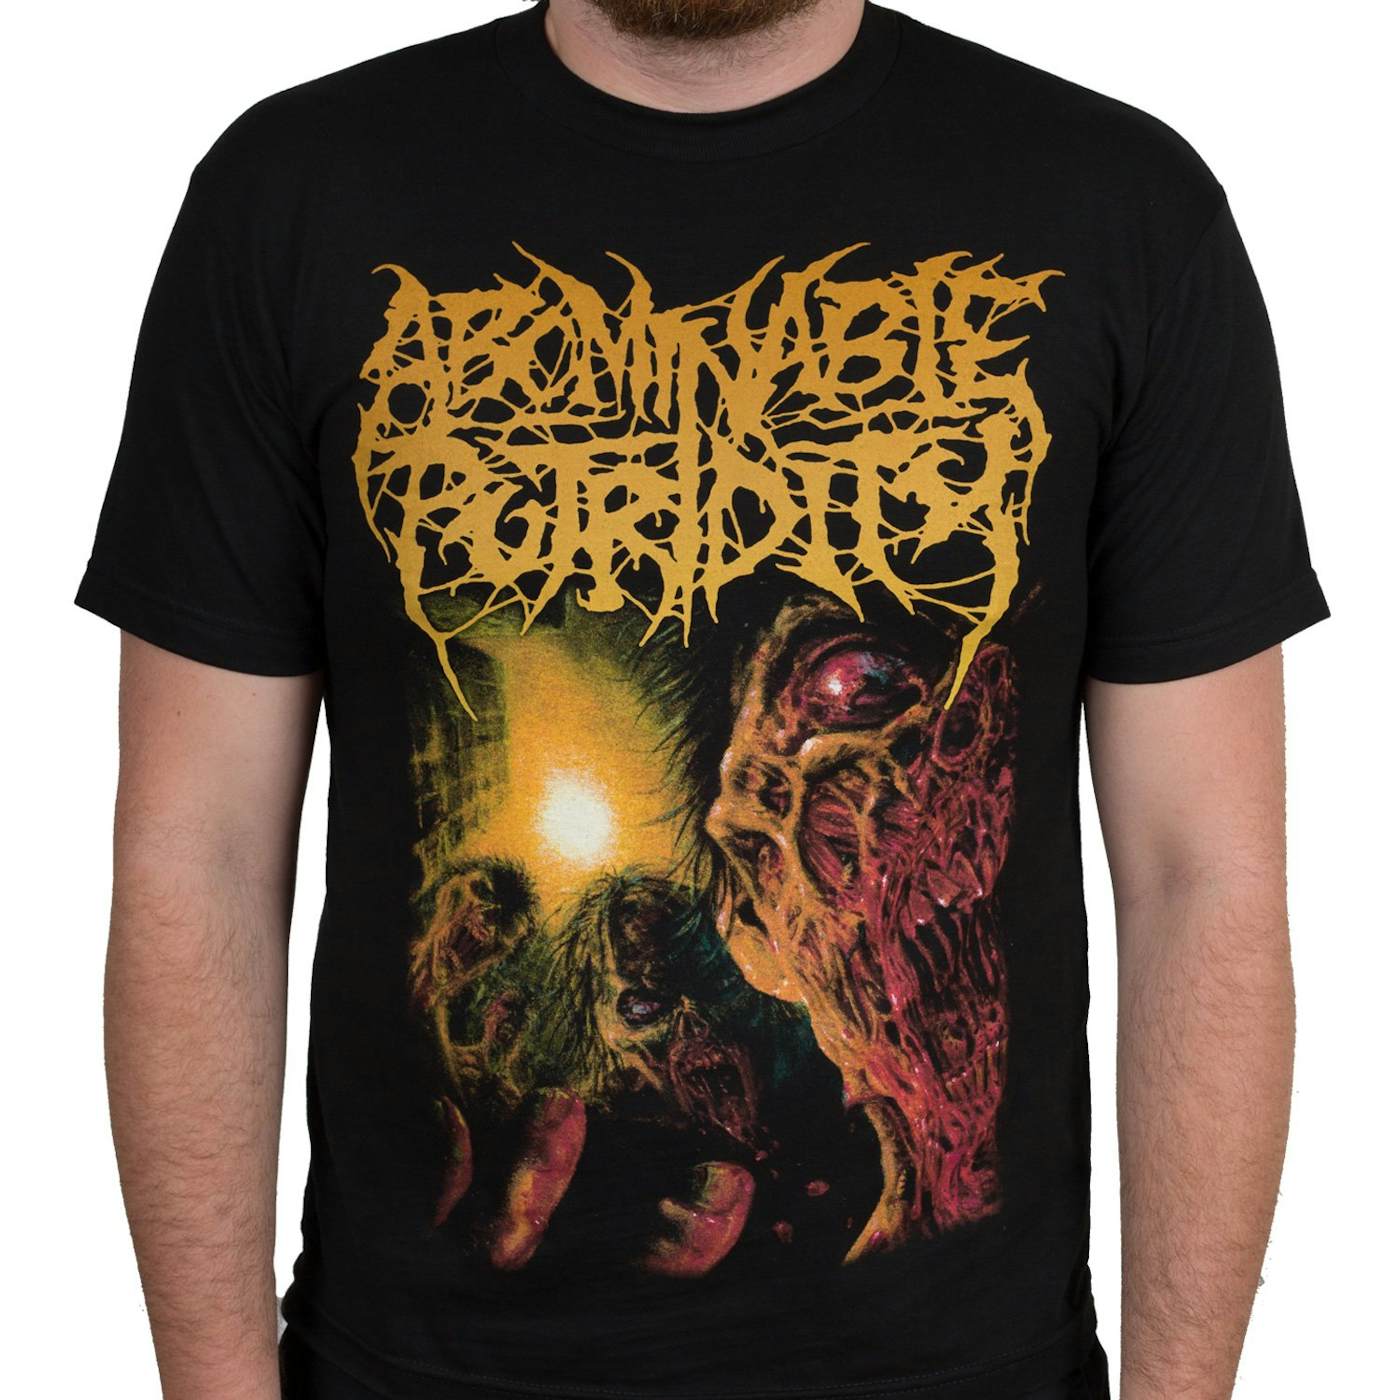 Abominable Putridity "Zombies" T-Shirt